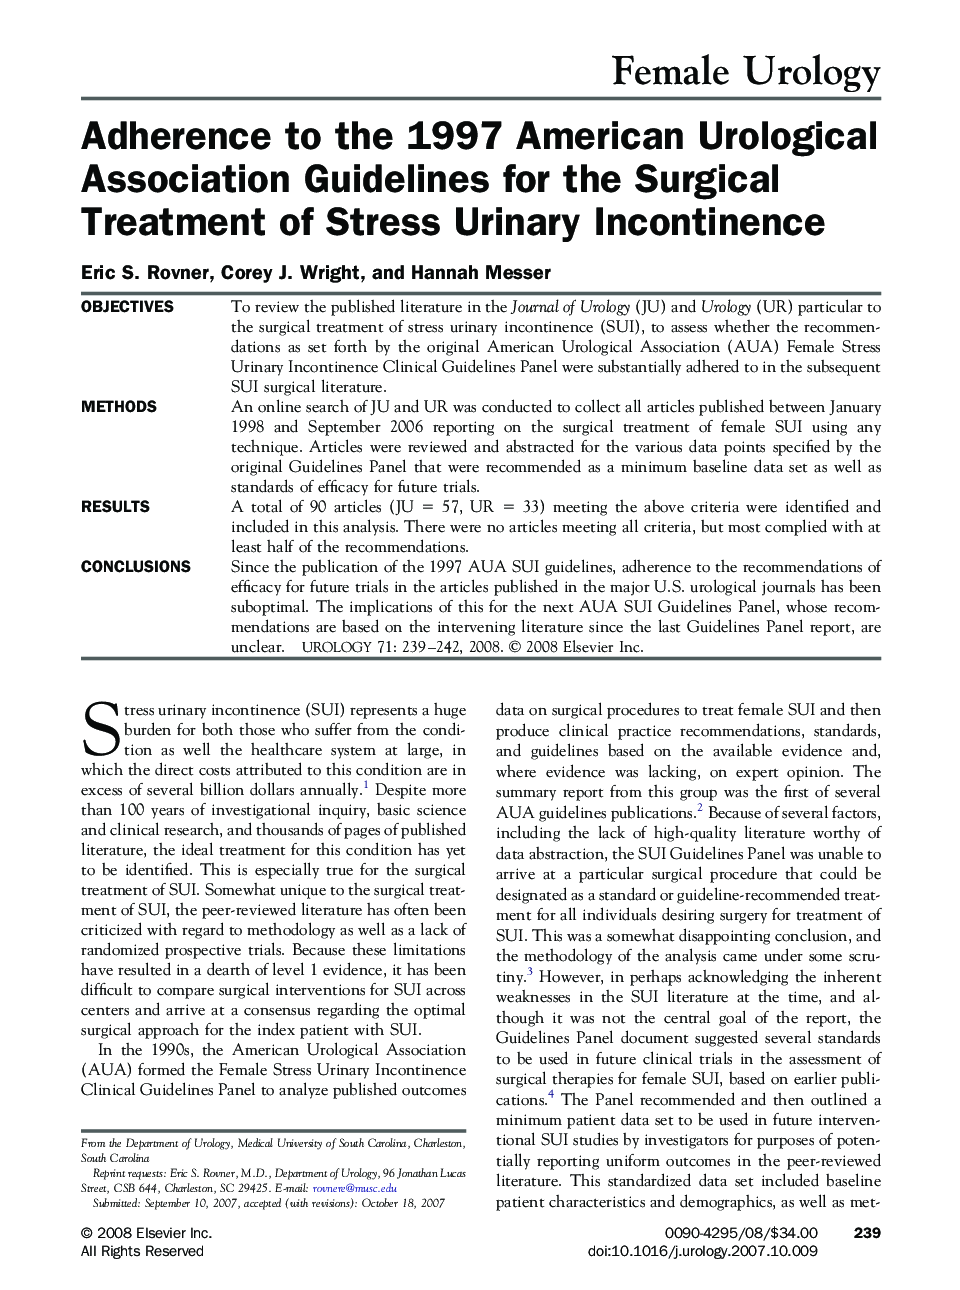 Adherence to the 1997 American Urological Association Guidelines for the Surgical Treatment of Stress Urinary Incontinence